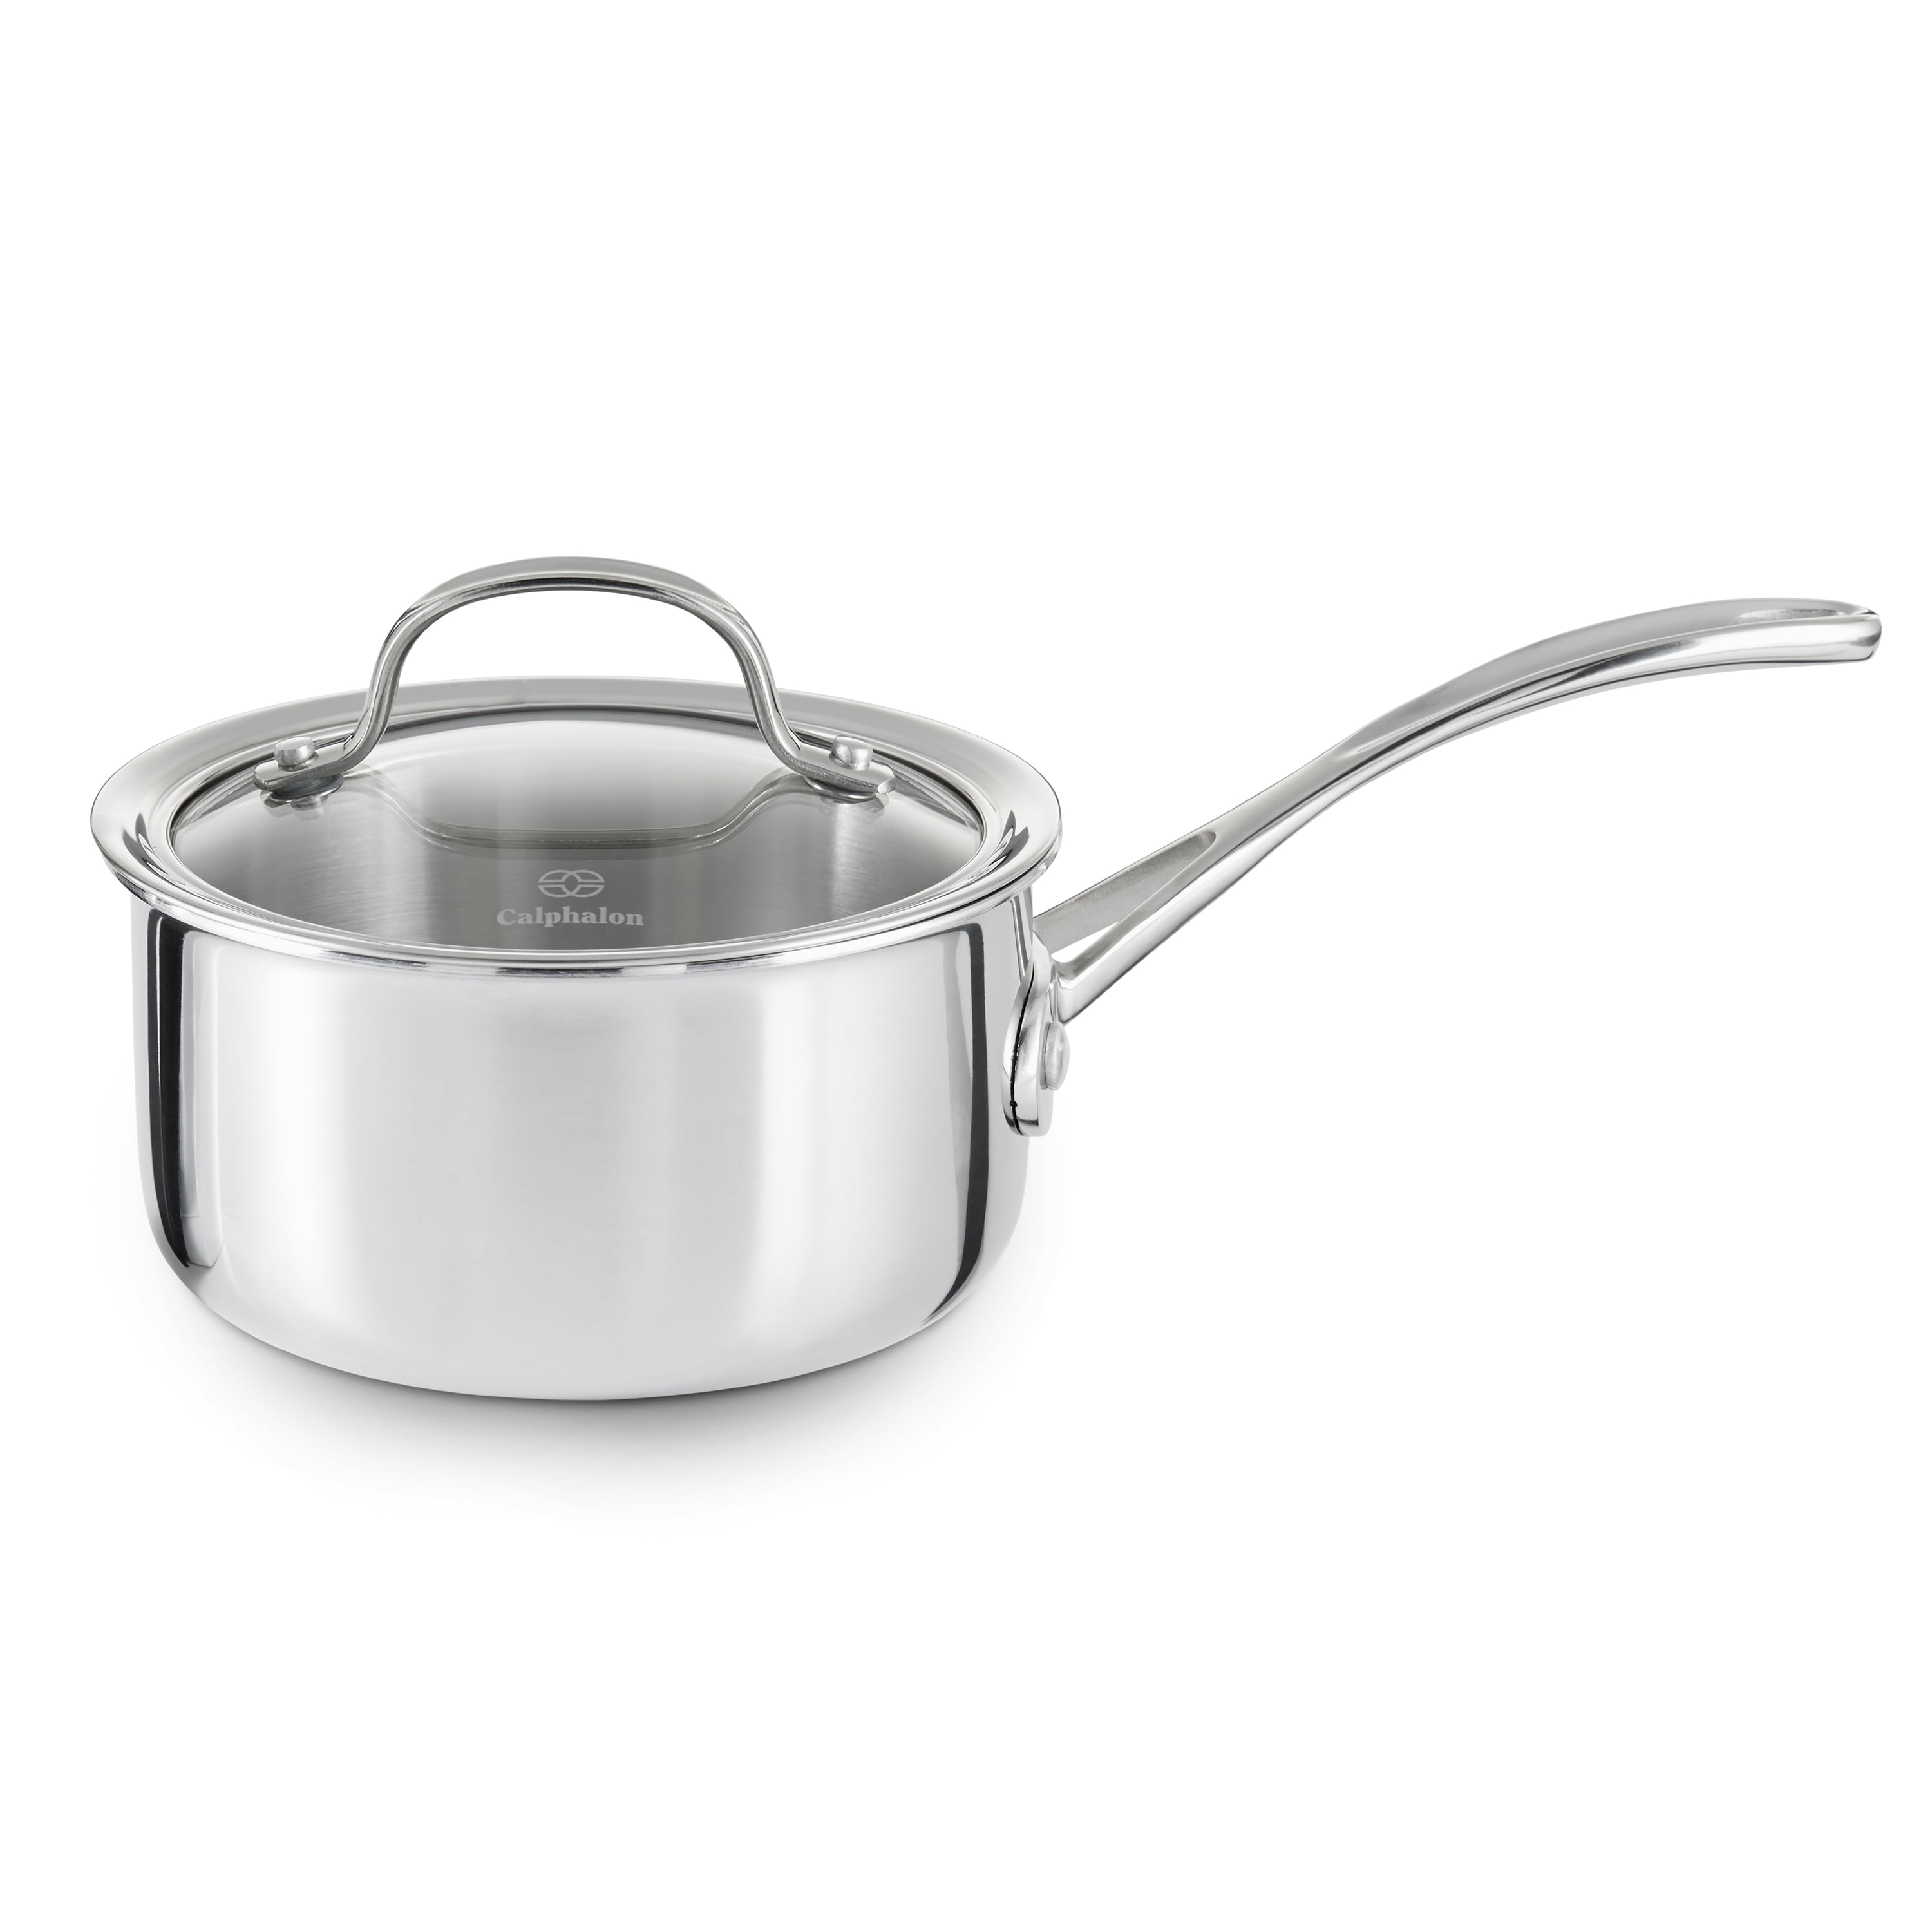 Walchoice 2 Quart Saucepan with Glass Lid, Tri-Ply Stainless Steel Milk Pan, Metal Induction Cookware for Soup Pasta (Size: 2qt)